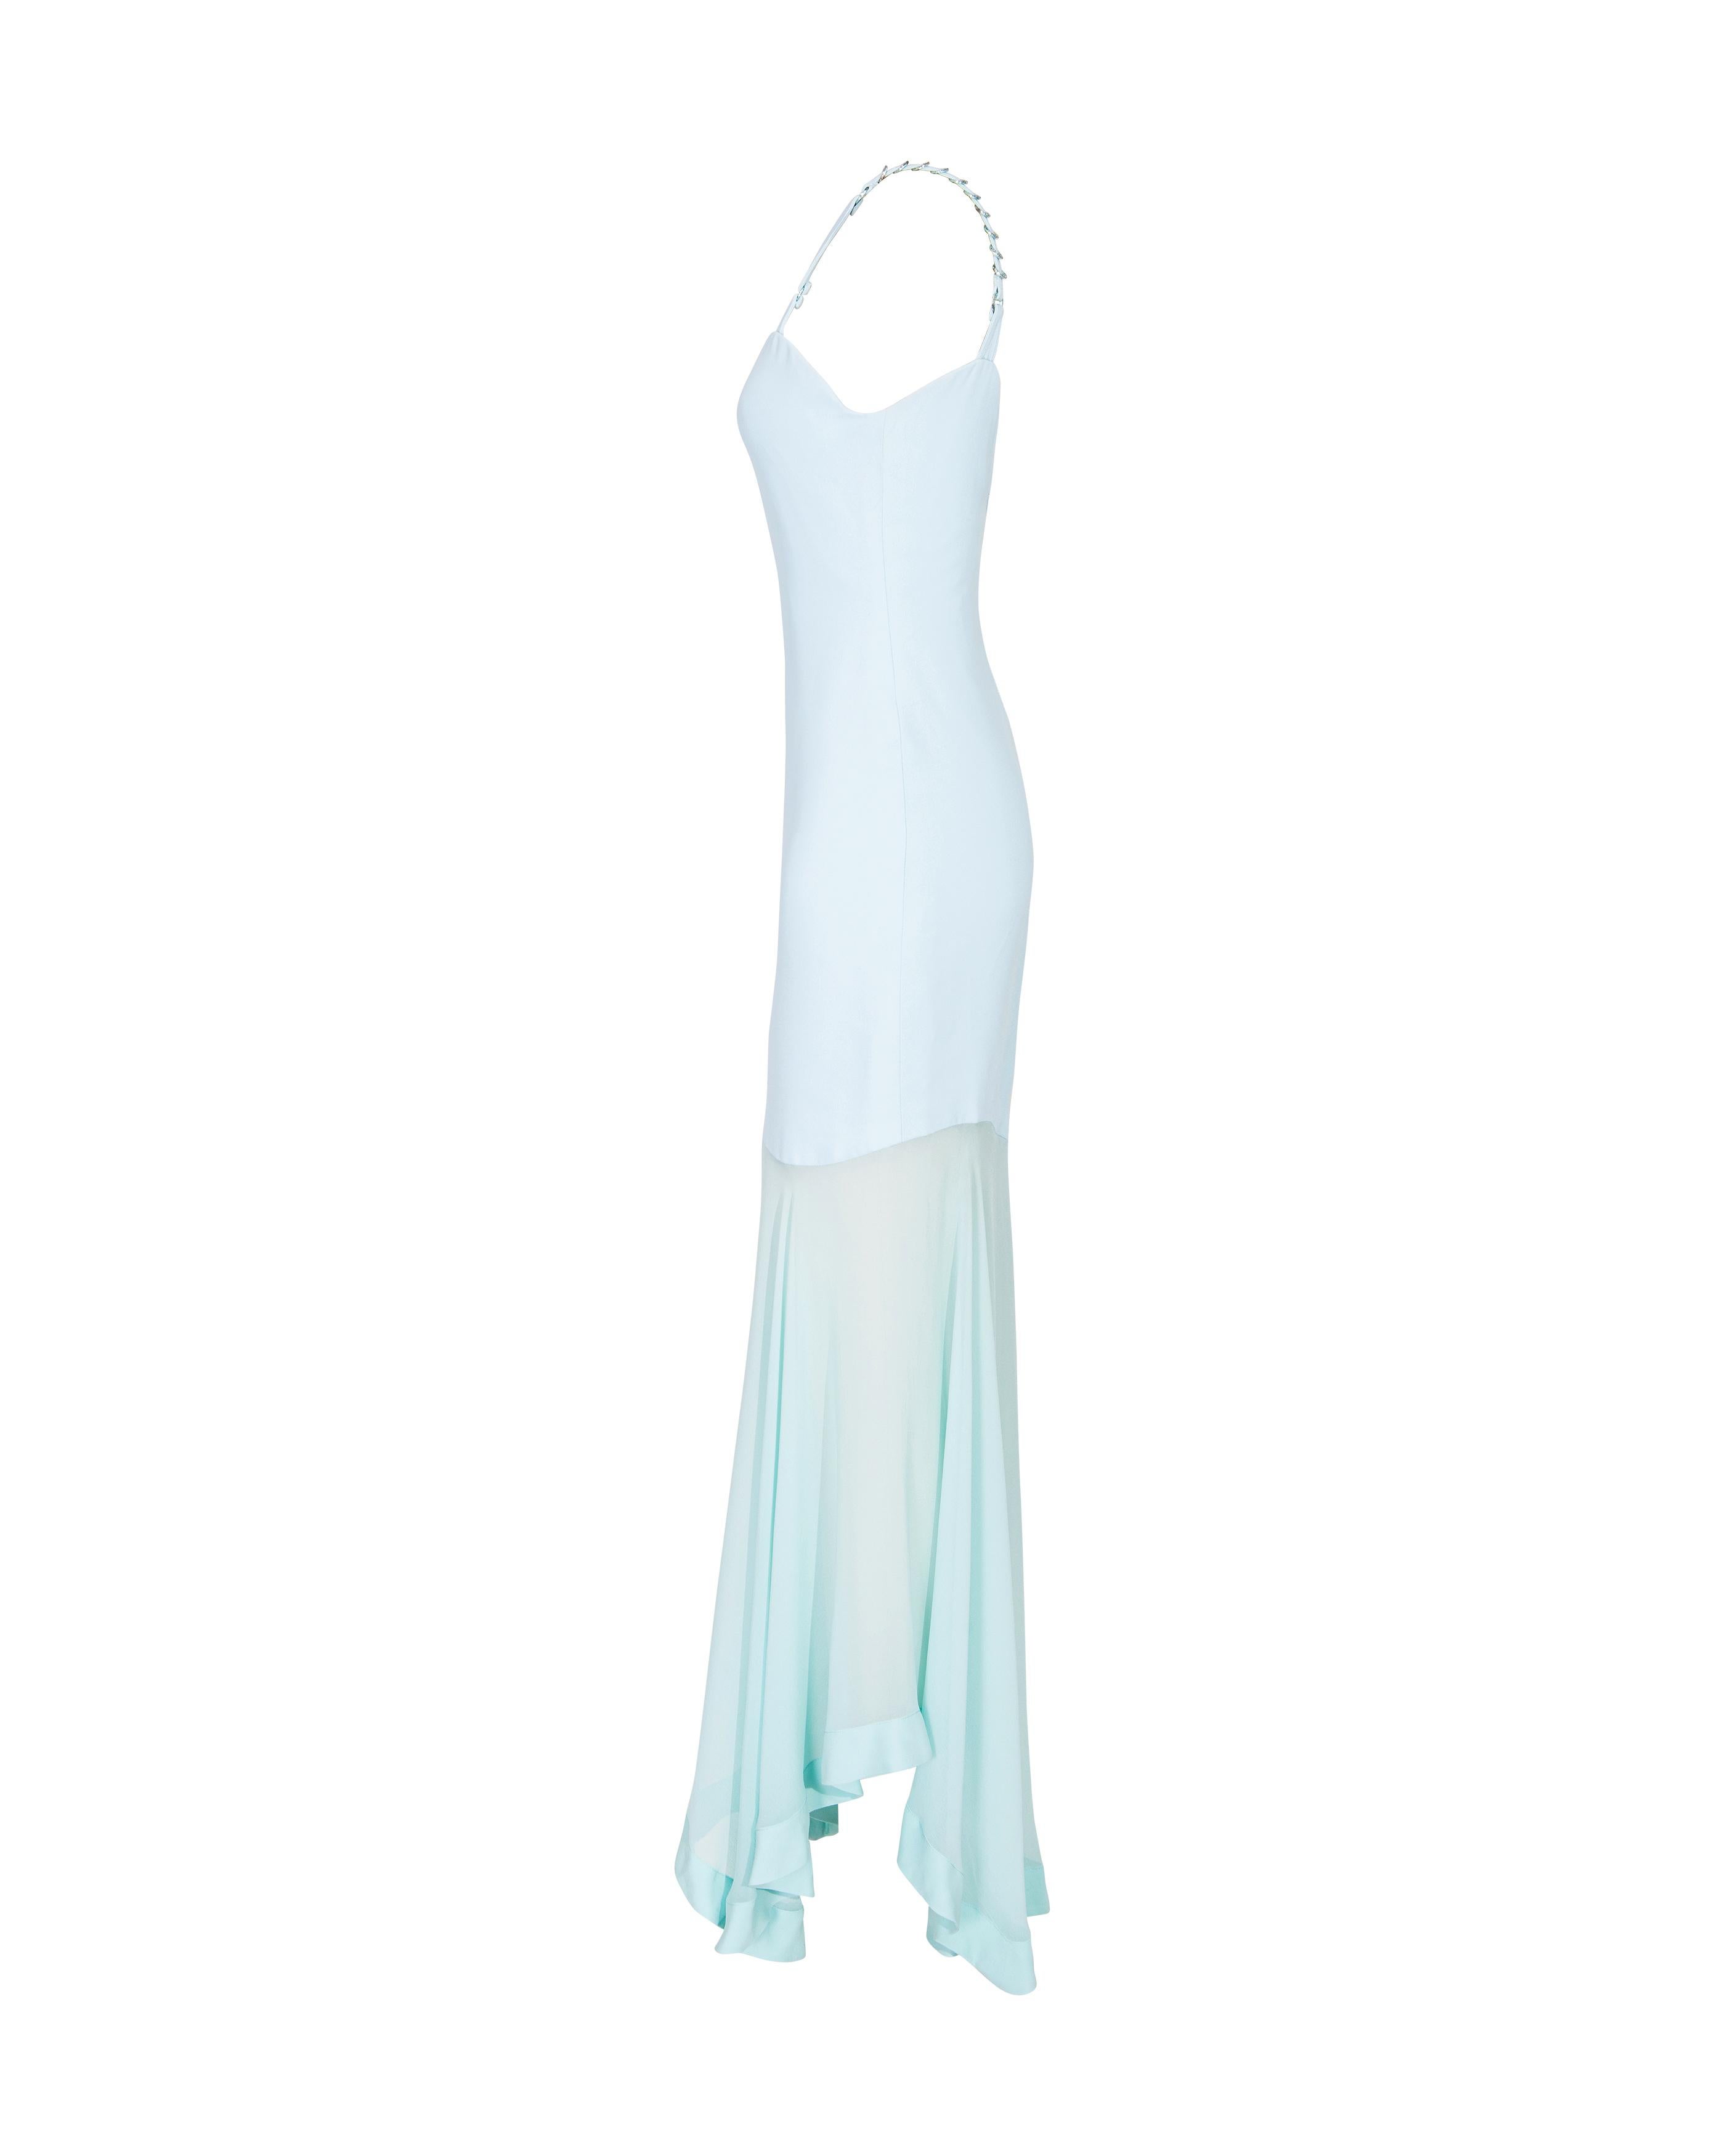 Women's S/S 1995 Gianni Versace Couture Sky Blue Bustier Gown